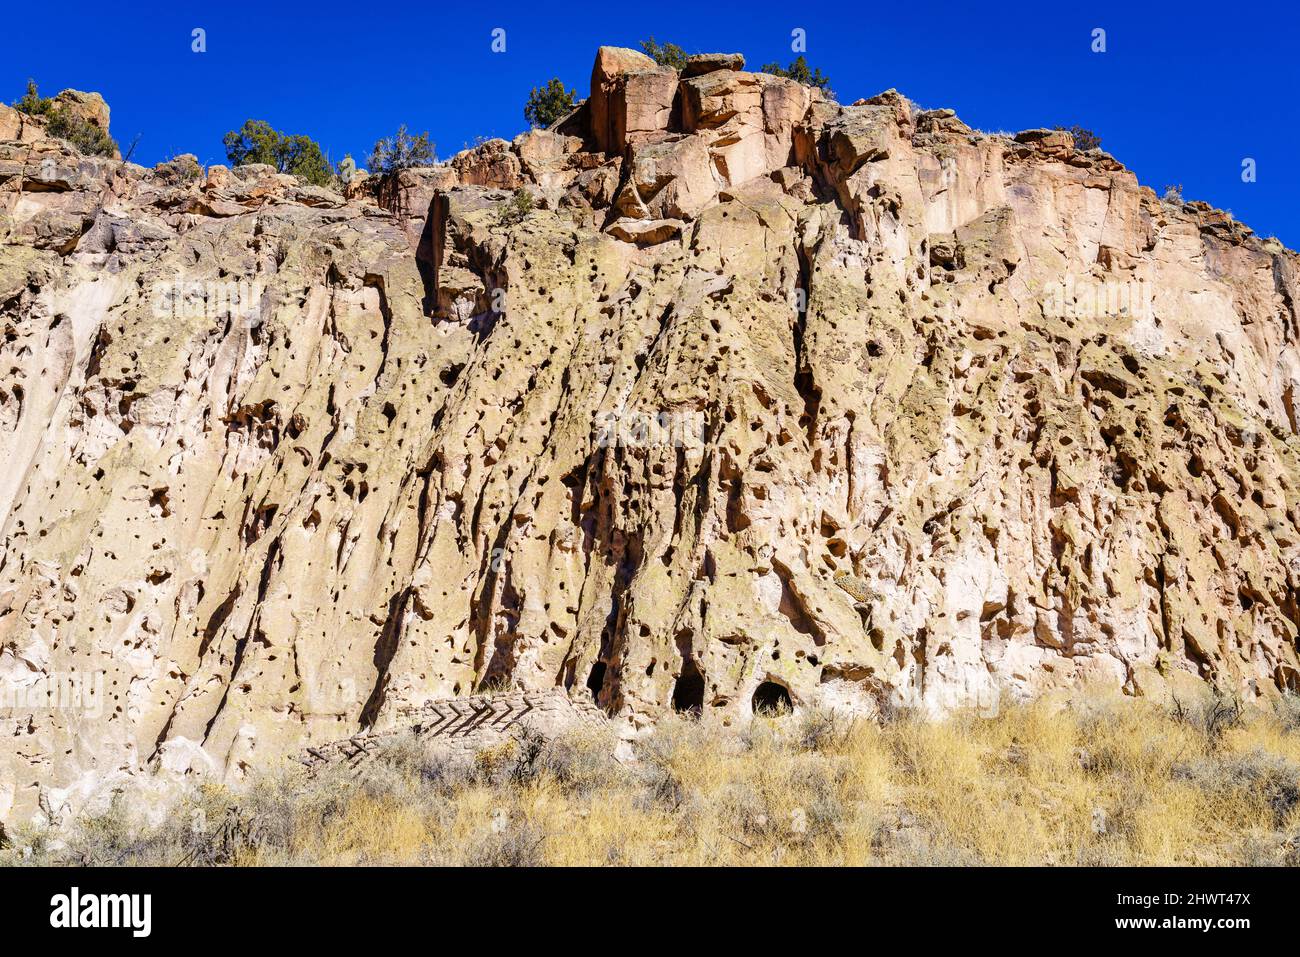 A view of the main cliff of Bandelier National Monument showing cave dwellings Stock Photo